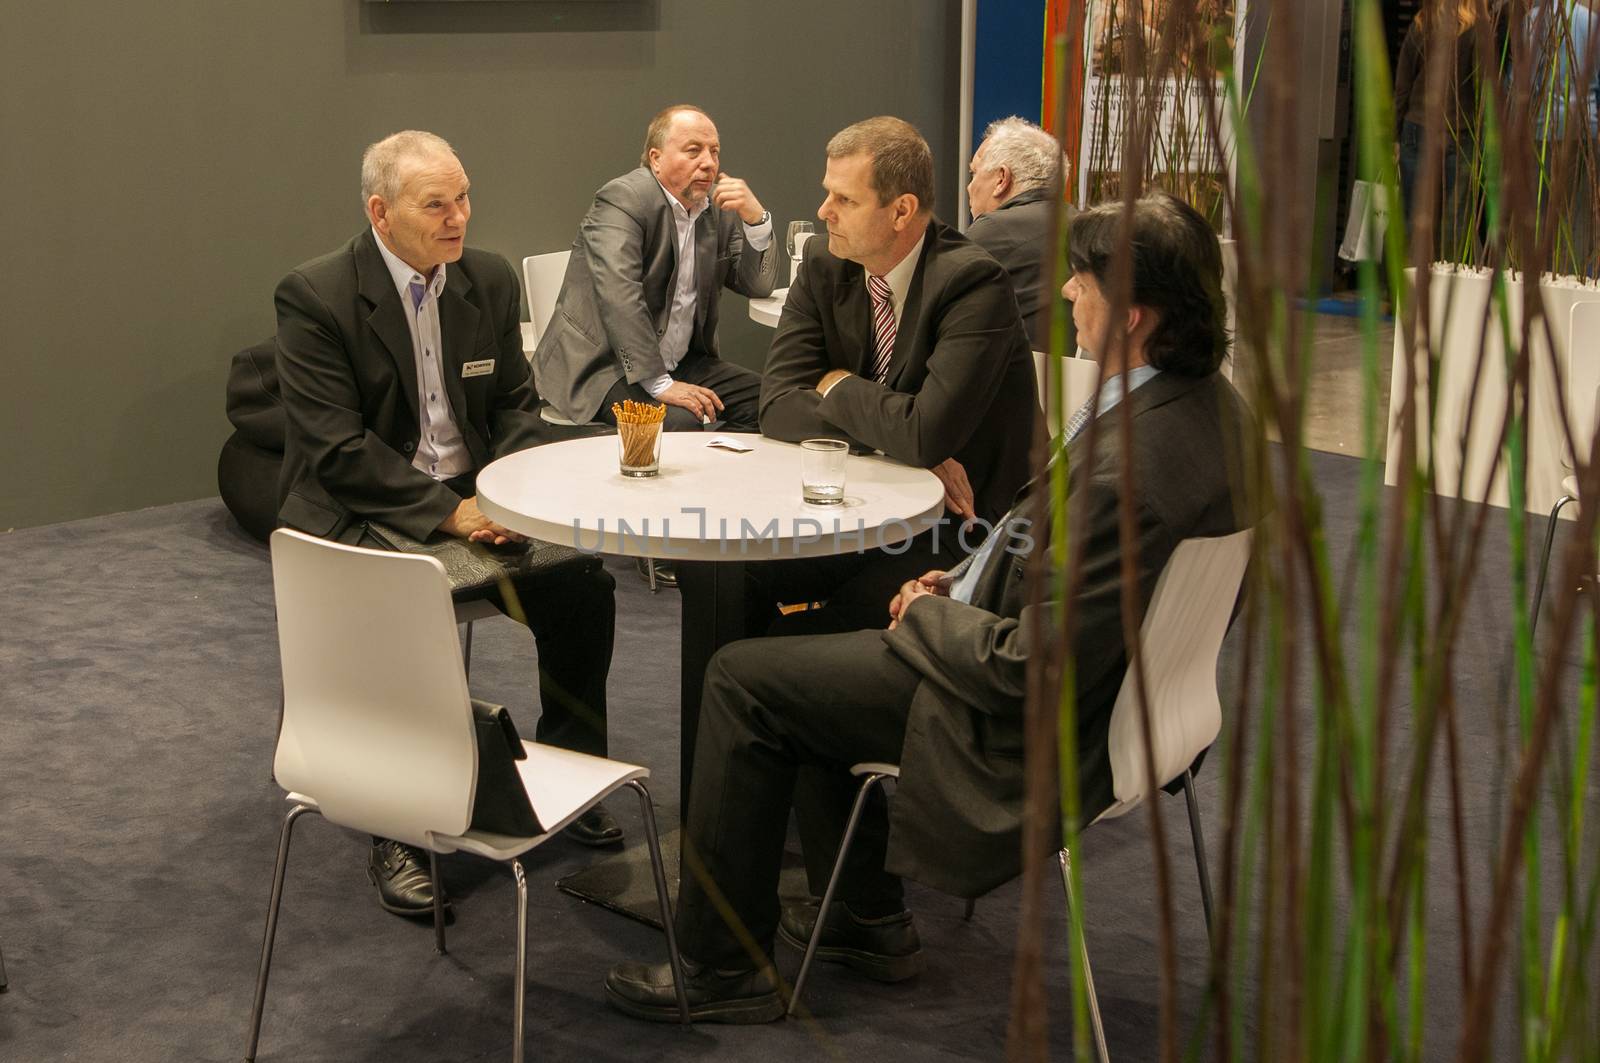 03/04/2017. Brno, Czech Republic. Business men having a meeting while attending an event at the convention trade center in Brno. BVV Brno Exhibition center. Czech Republic by gonzalobell